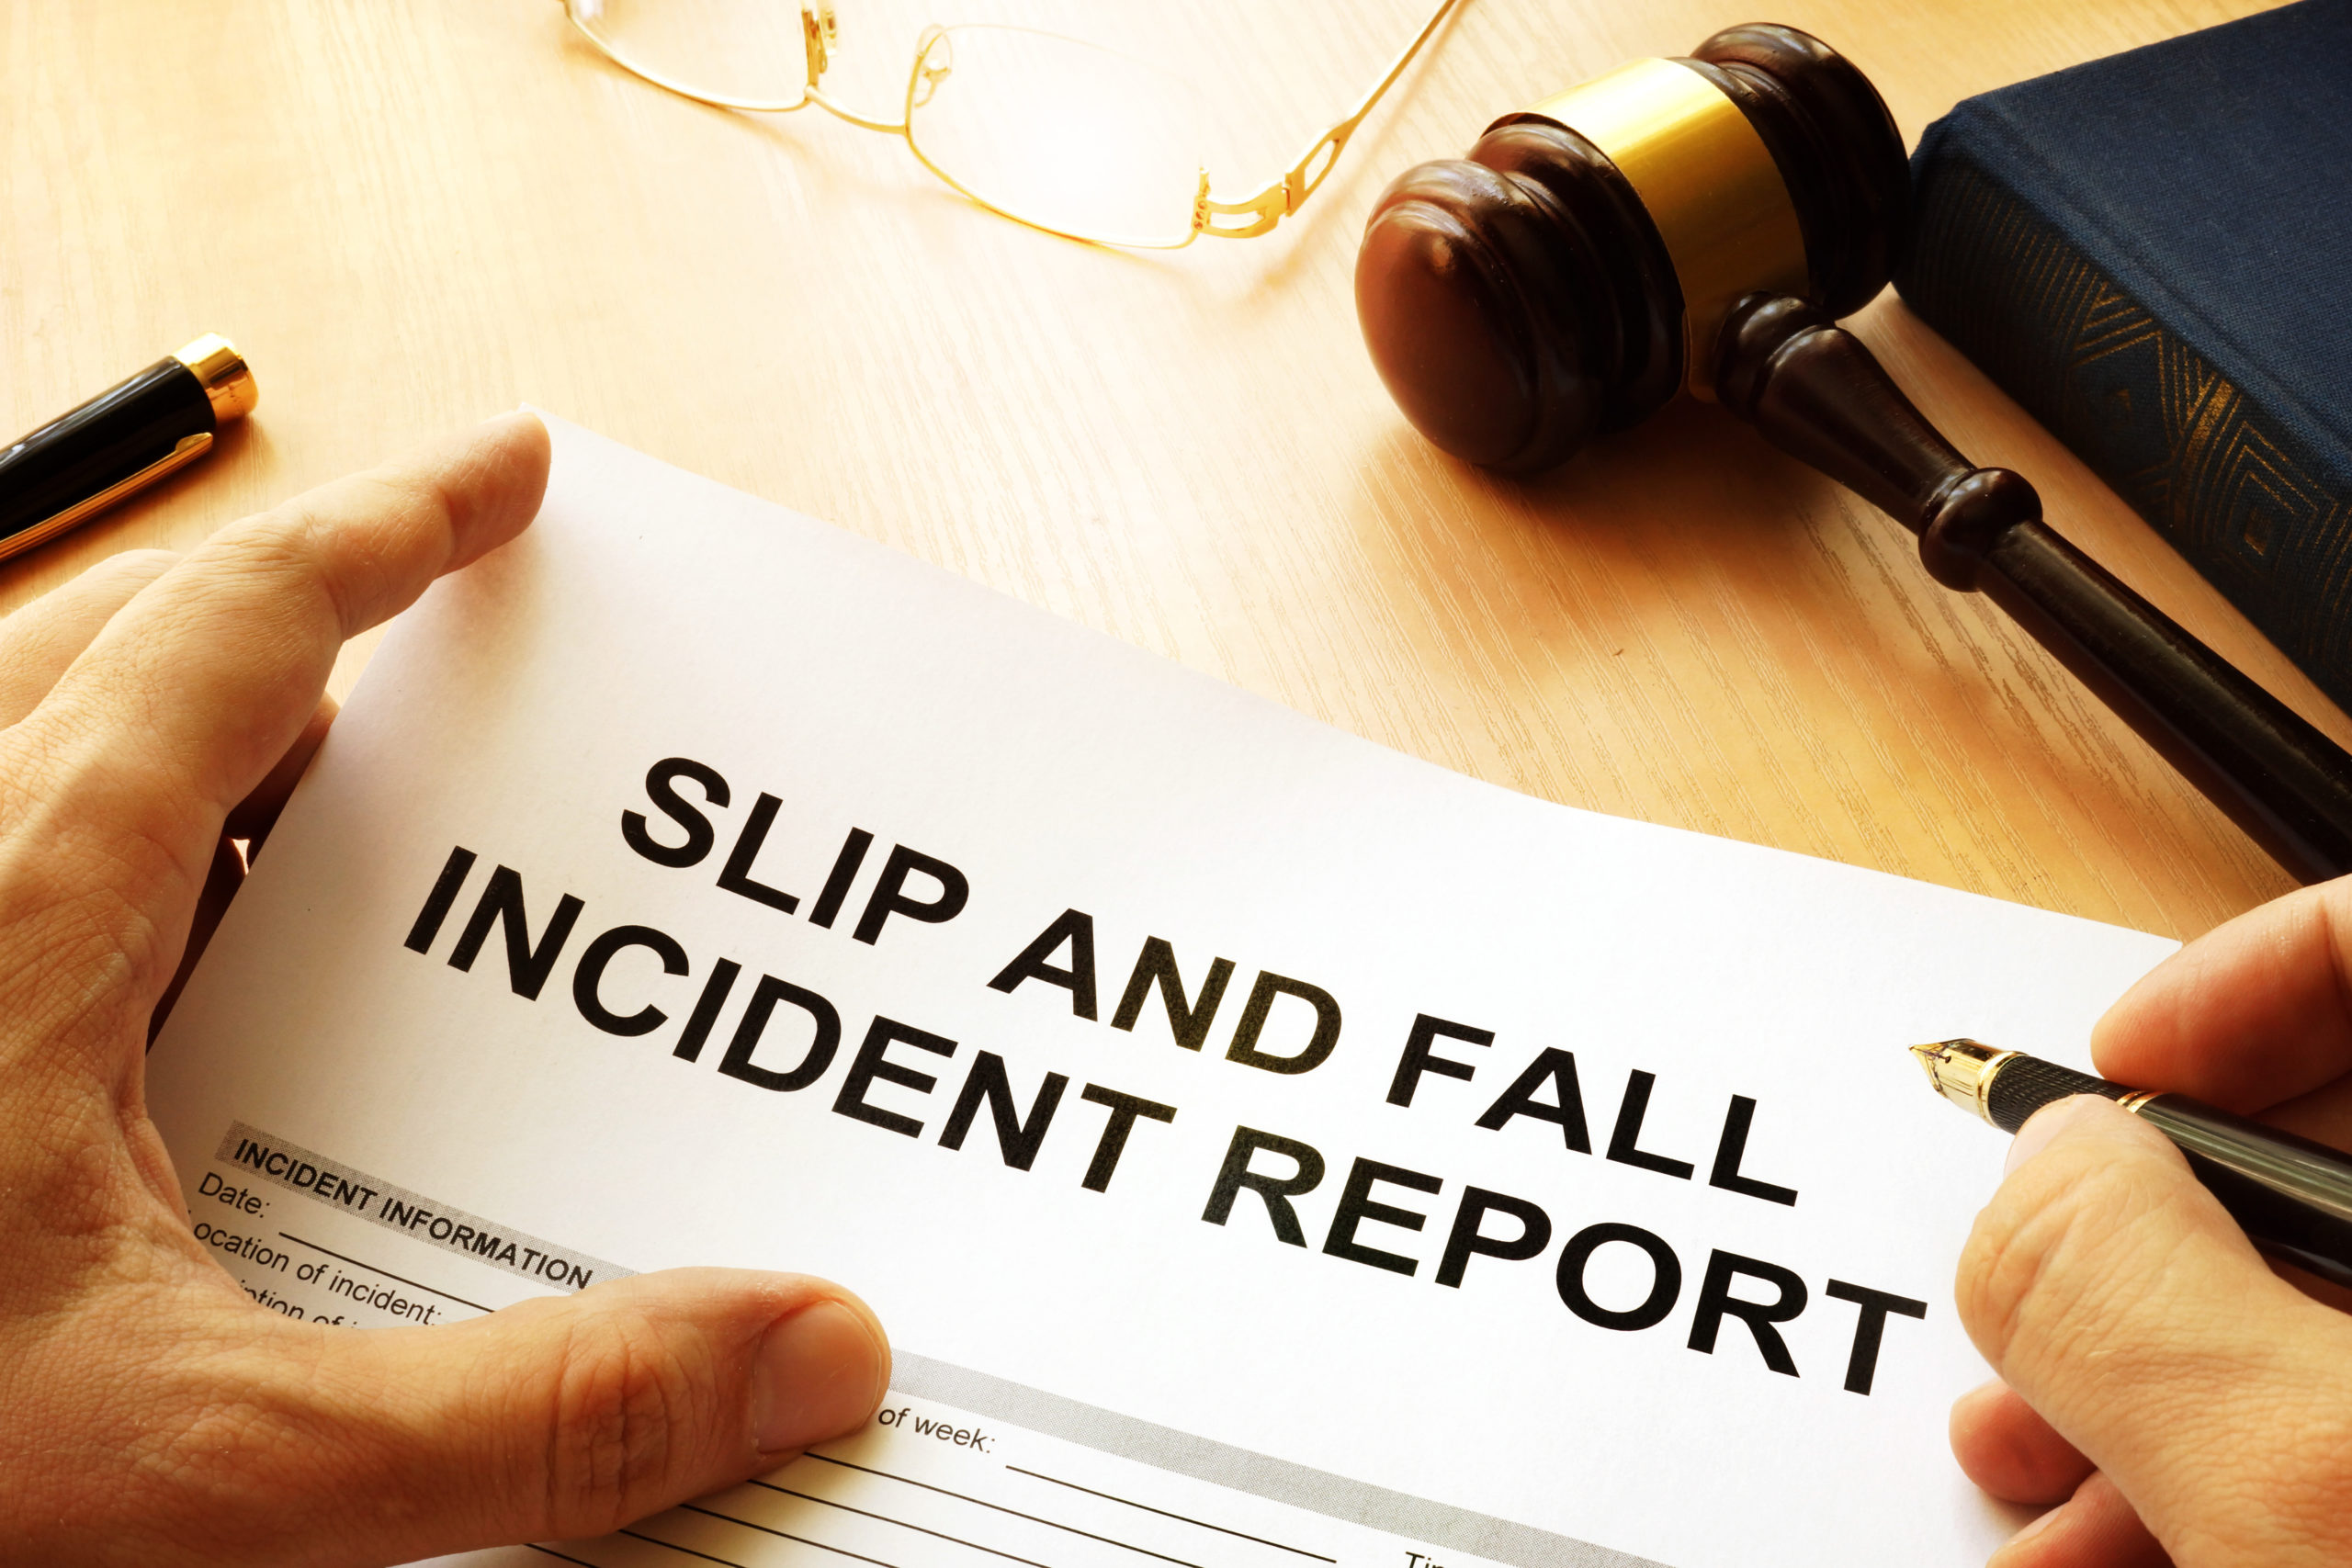 How would you describe a slip and fall accident - Houston Personal Injury Lawyer Chelsie King Garza